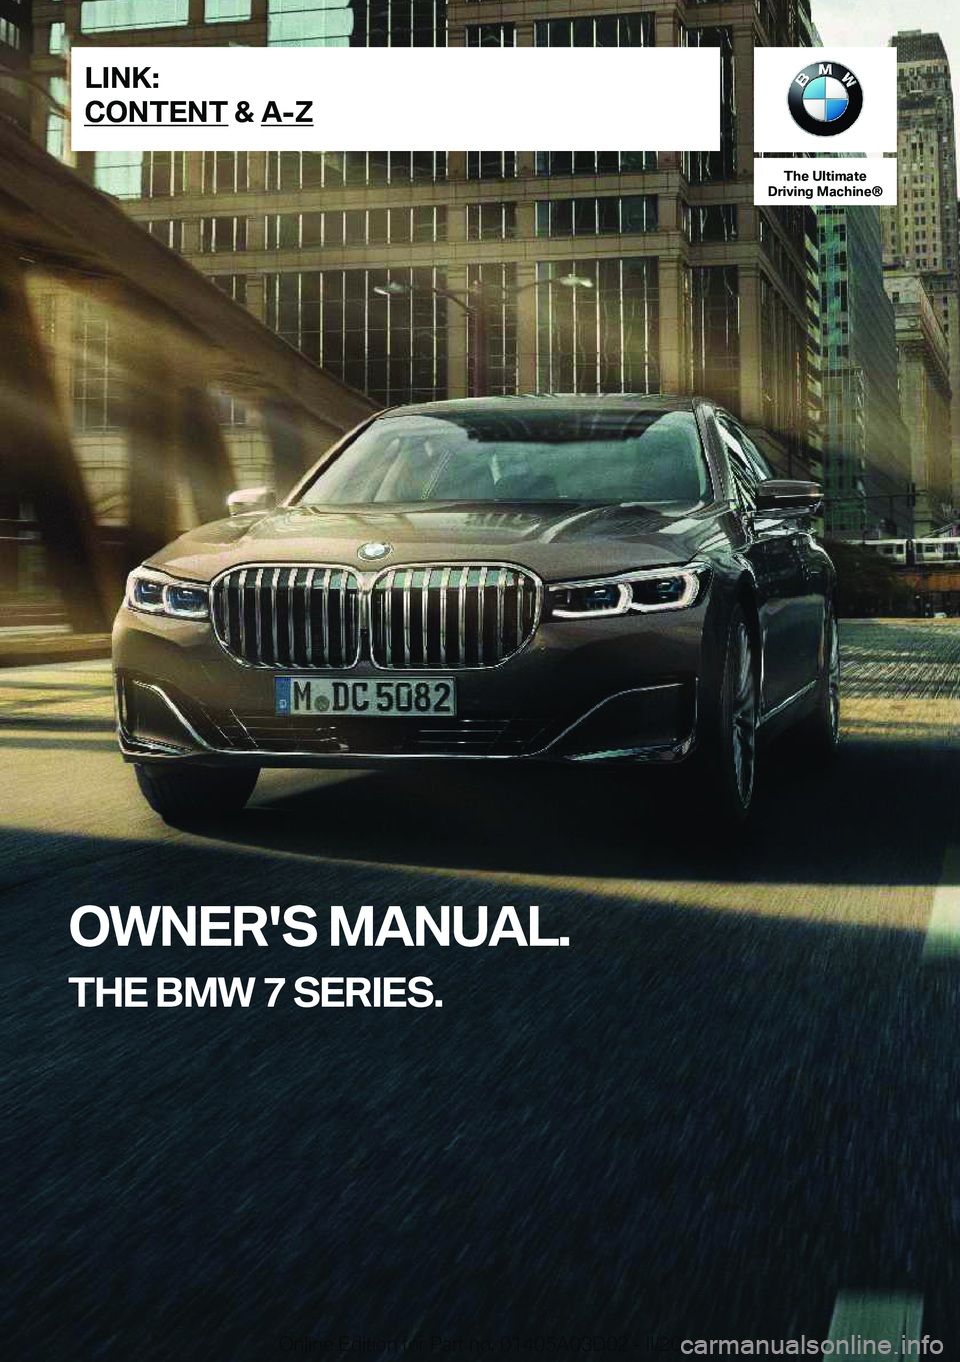 BMW 7 SERIES 2021  Owners Manual �T�h�e��U�l�t�i�m�a�t�e
�D�r�i�v�i�n�g��M�a�c�h�i�n�e�n
�O�W�N�E�R�'�S��M�A�N�U�A�L�.
�T�H�E��B�M�W��7��S�E�R�I�E�S�.�L�I�N�K�:
�C�O�N�T�E�N�T��&��A�-�Z�O�n�l�i�n�e��E�d�i�t�i�o�n��f�o�r